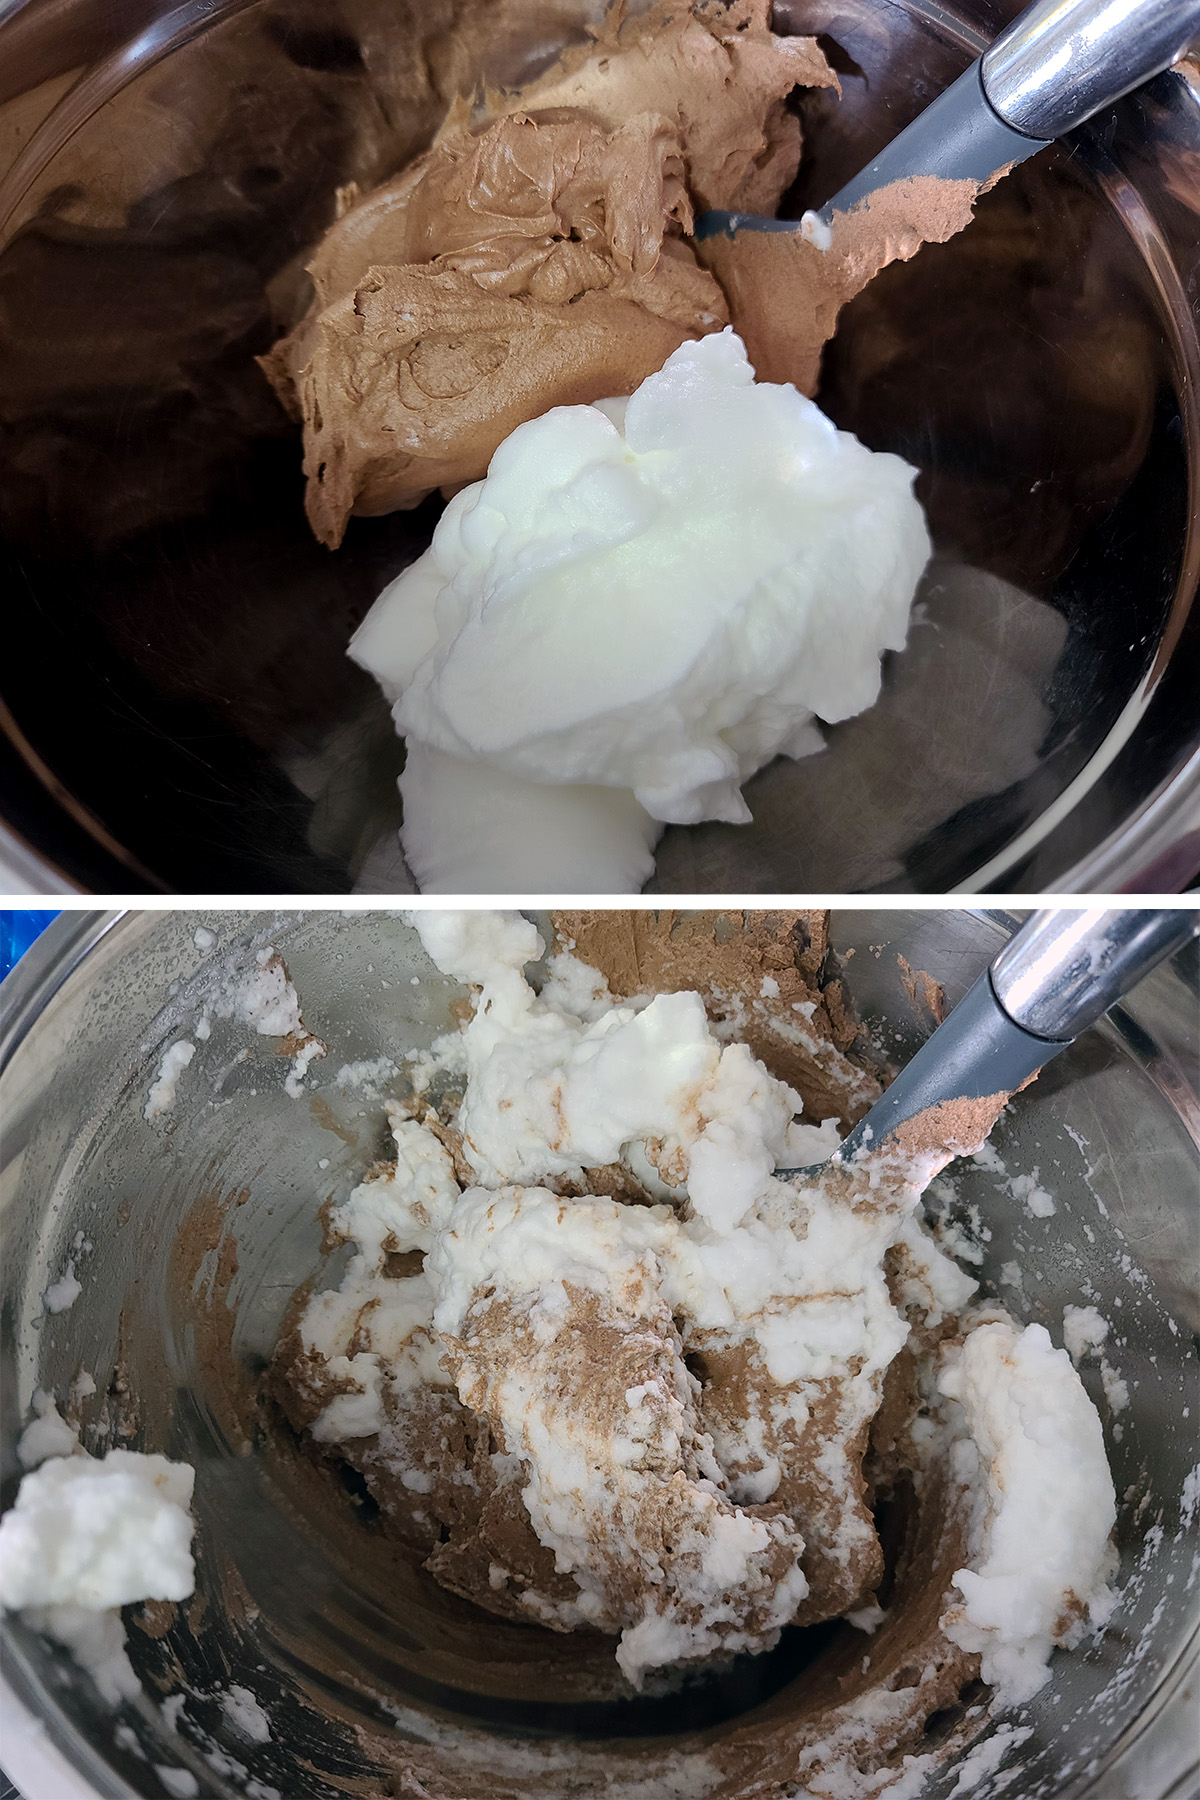 A two part image showing the chocolate whipped cream being folded together with the whipped egg whites.